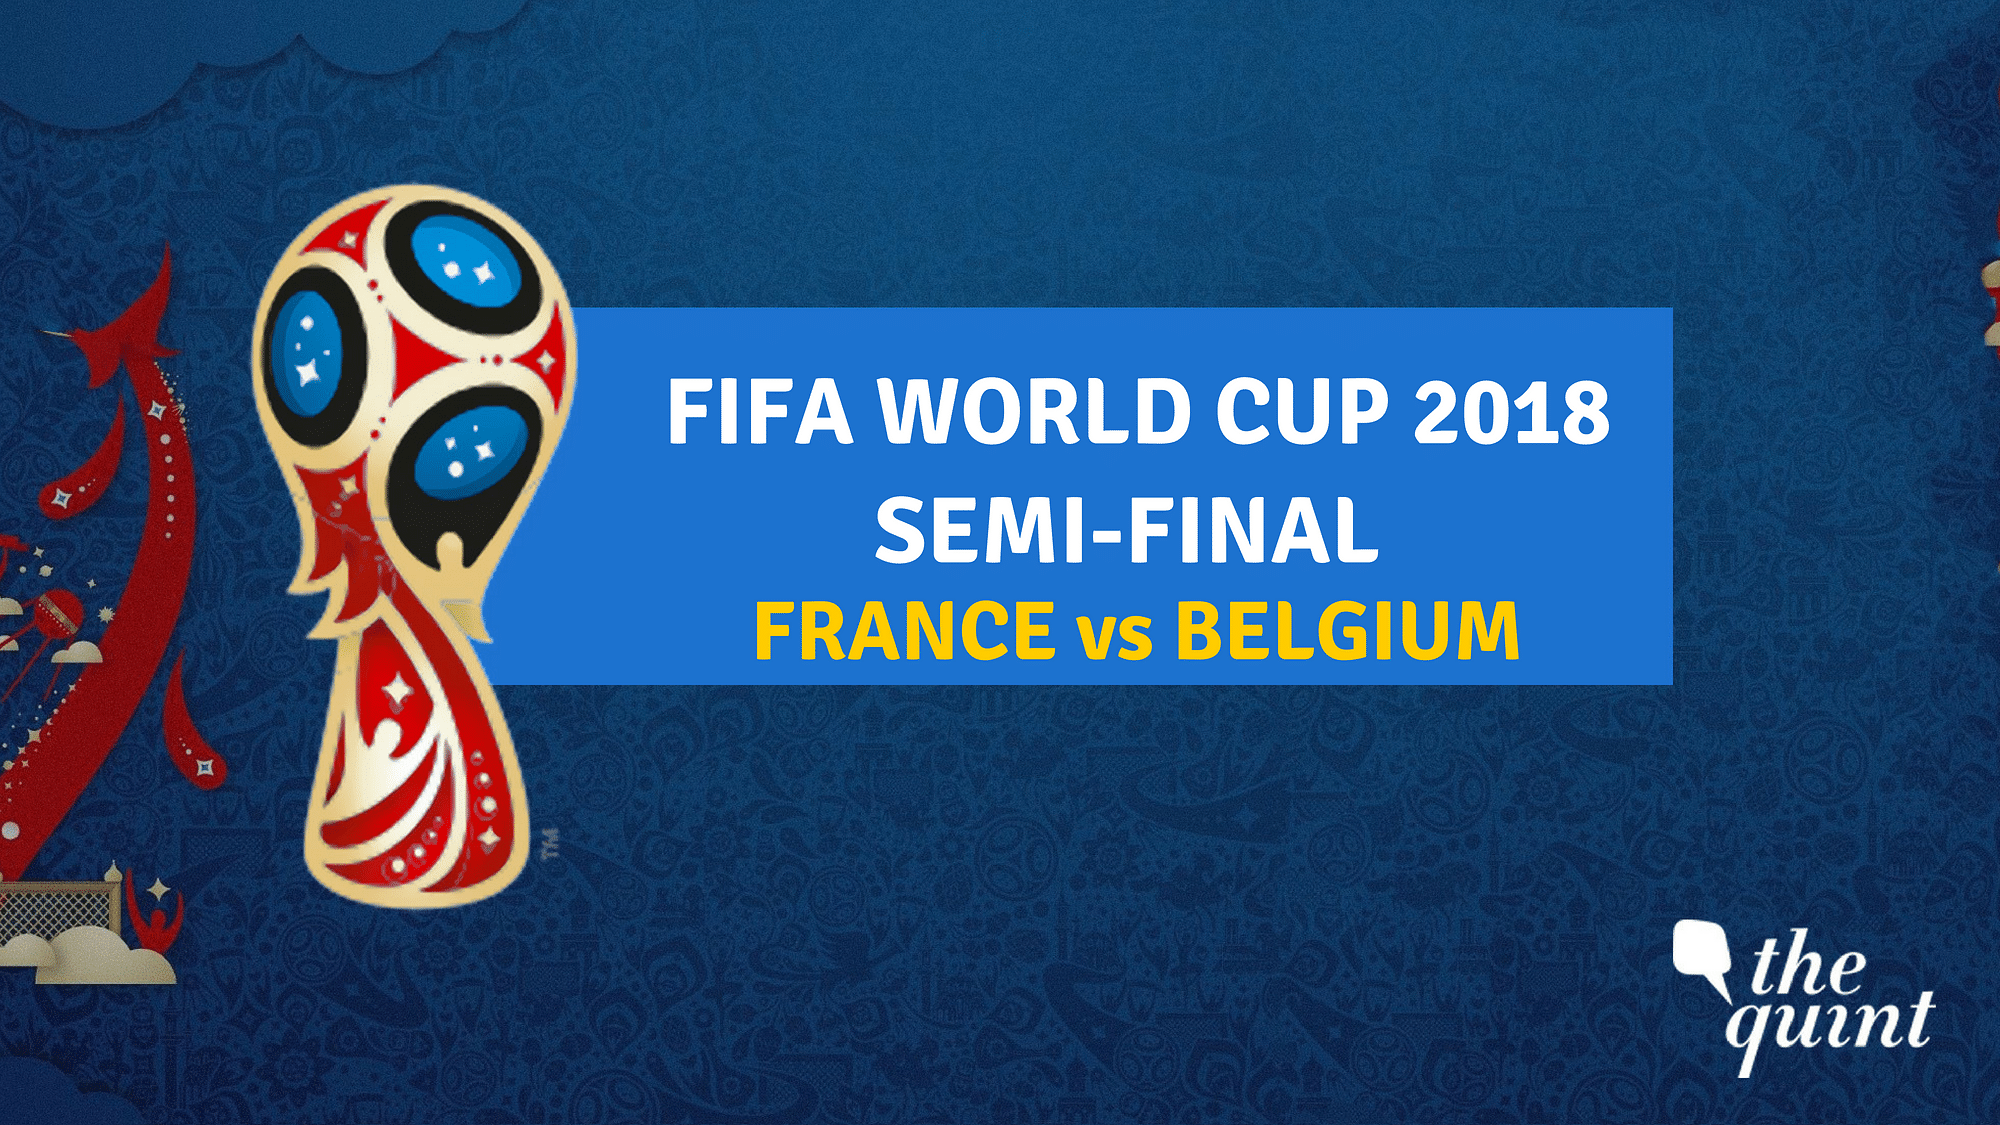 Semi-final 1 of FIFA World Cup 2018 will be played between France and Belgium.